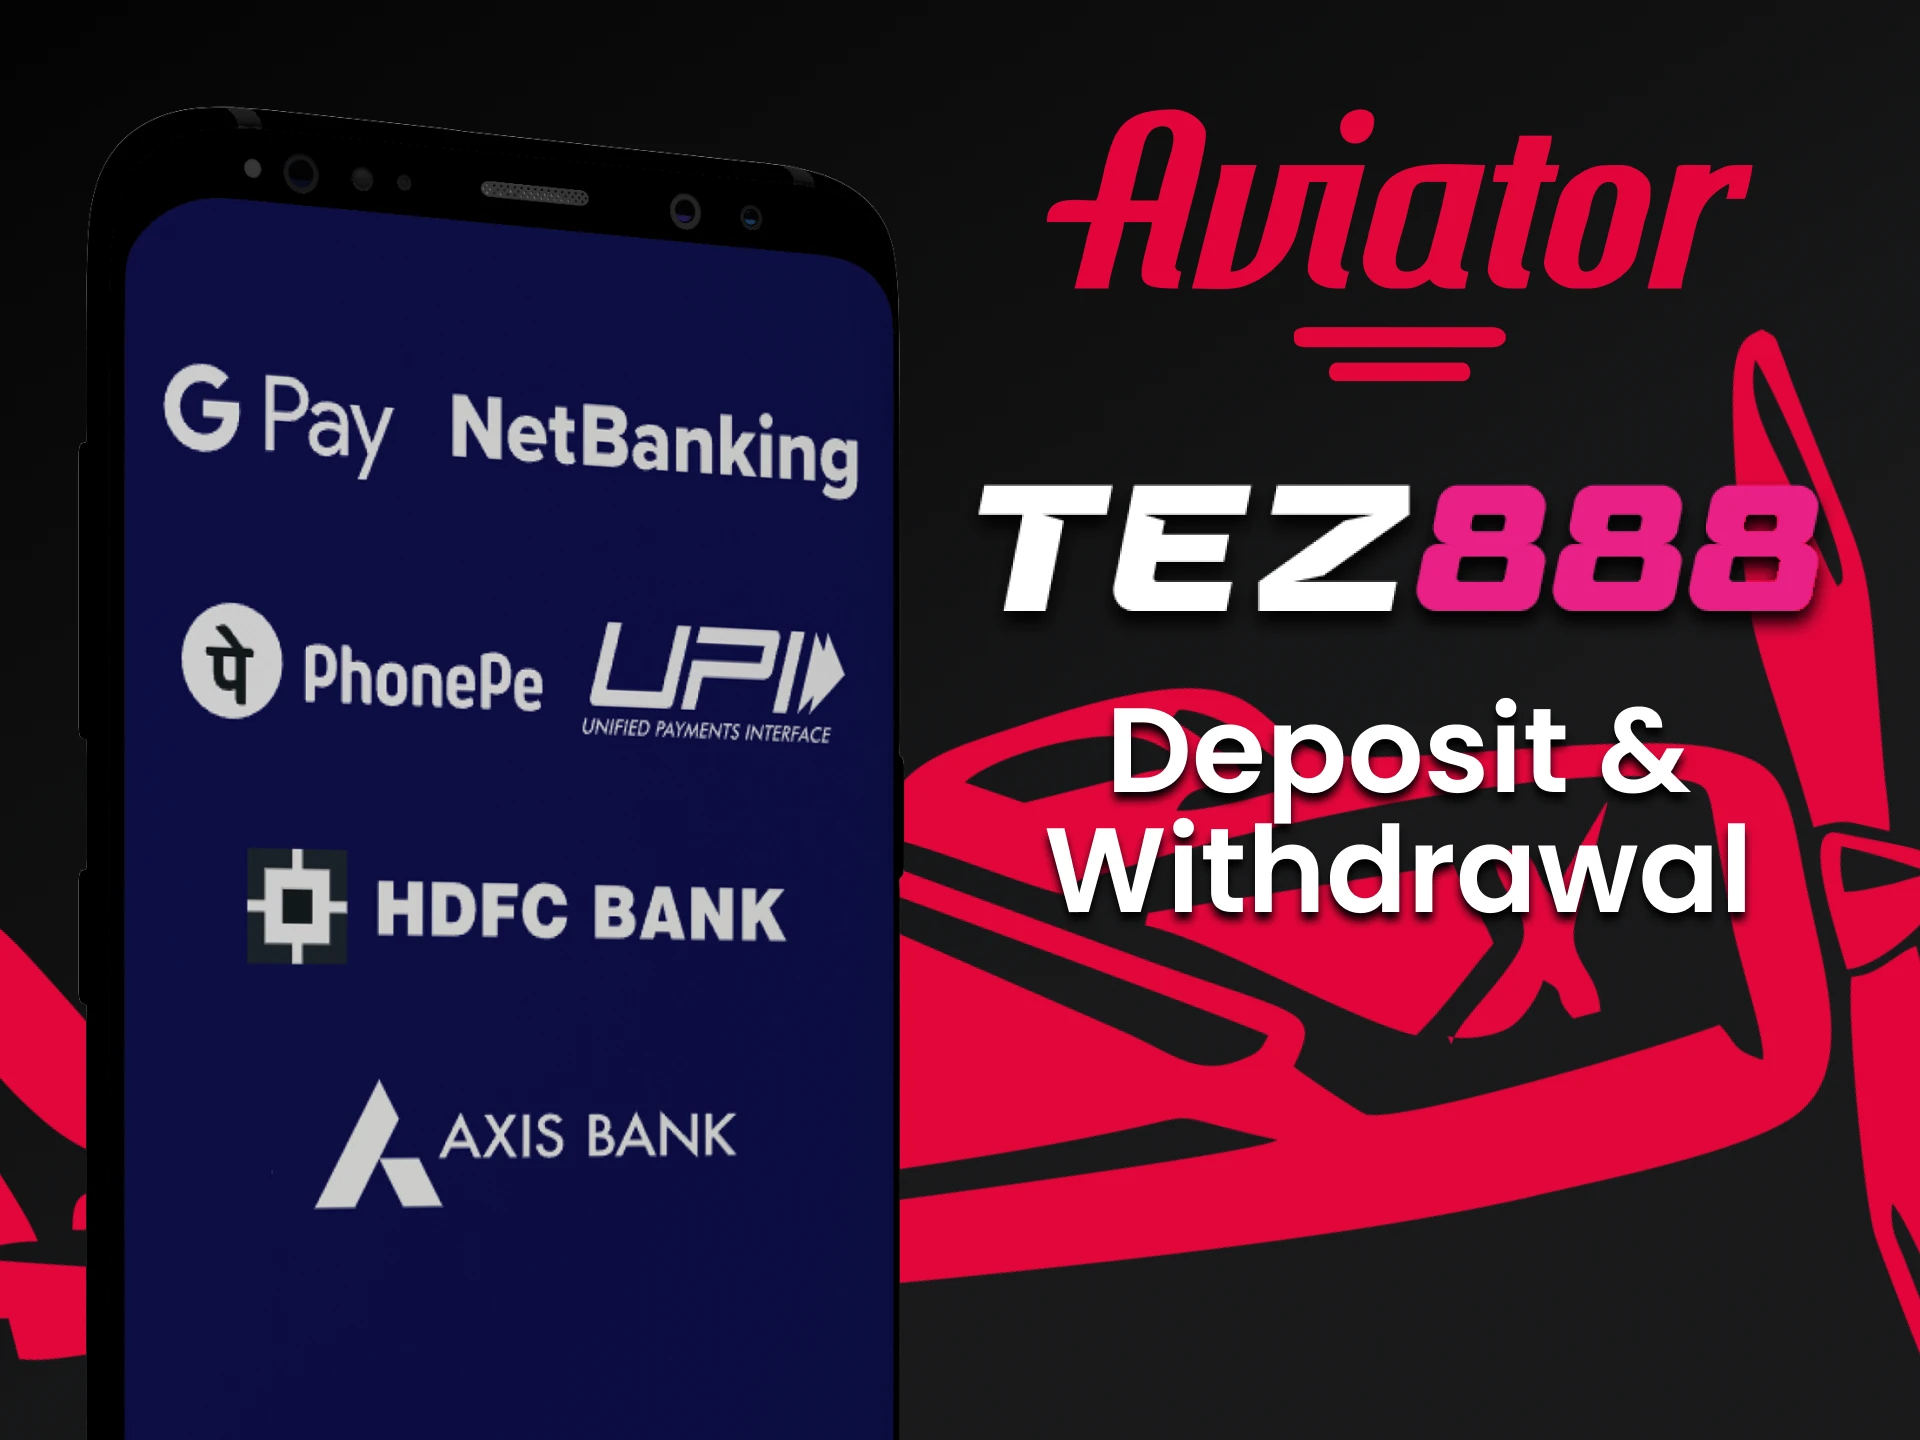 Learn how to transact using the Tez888 app to play Aviator.